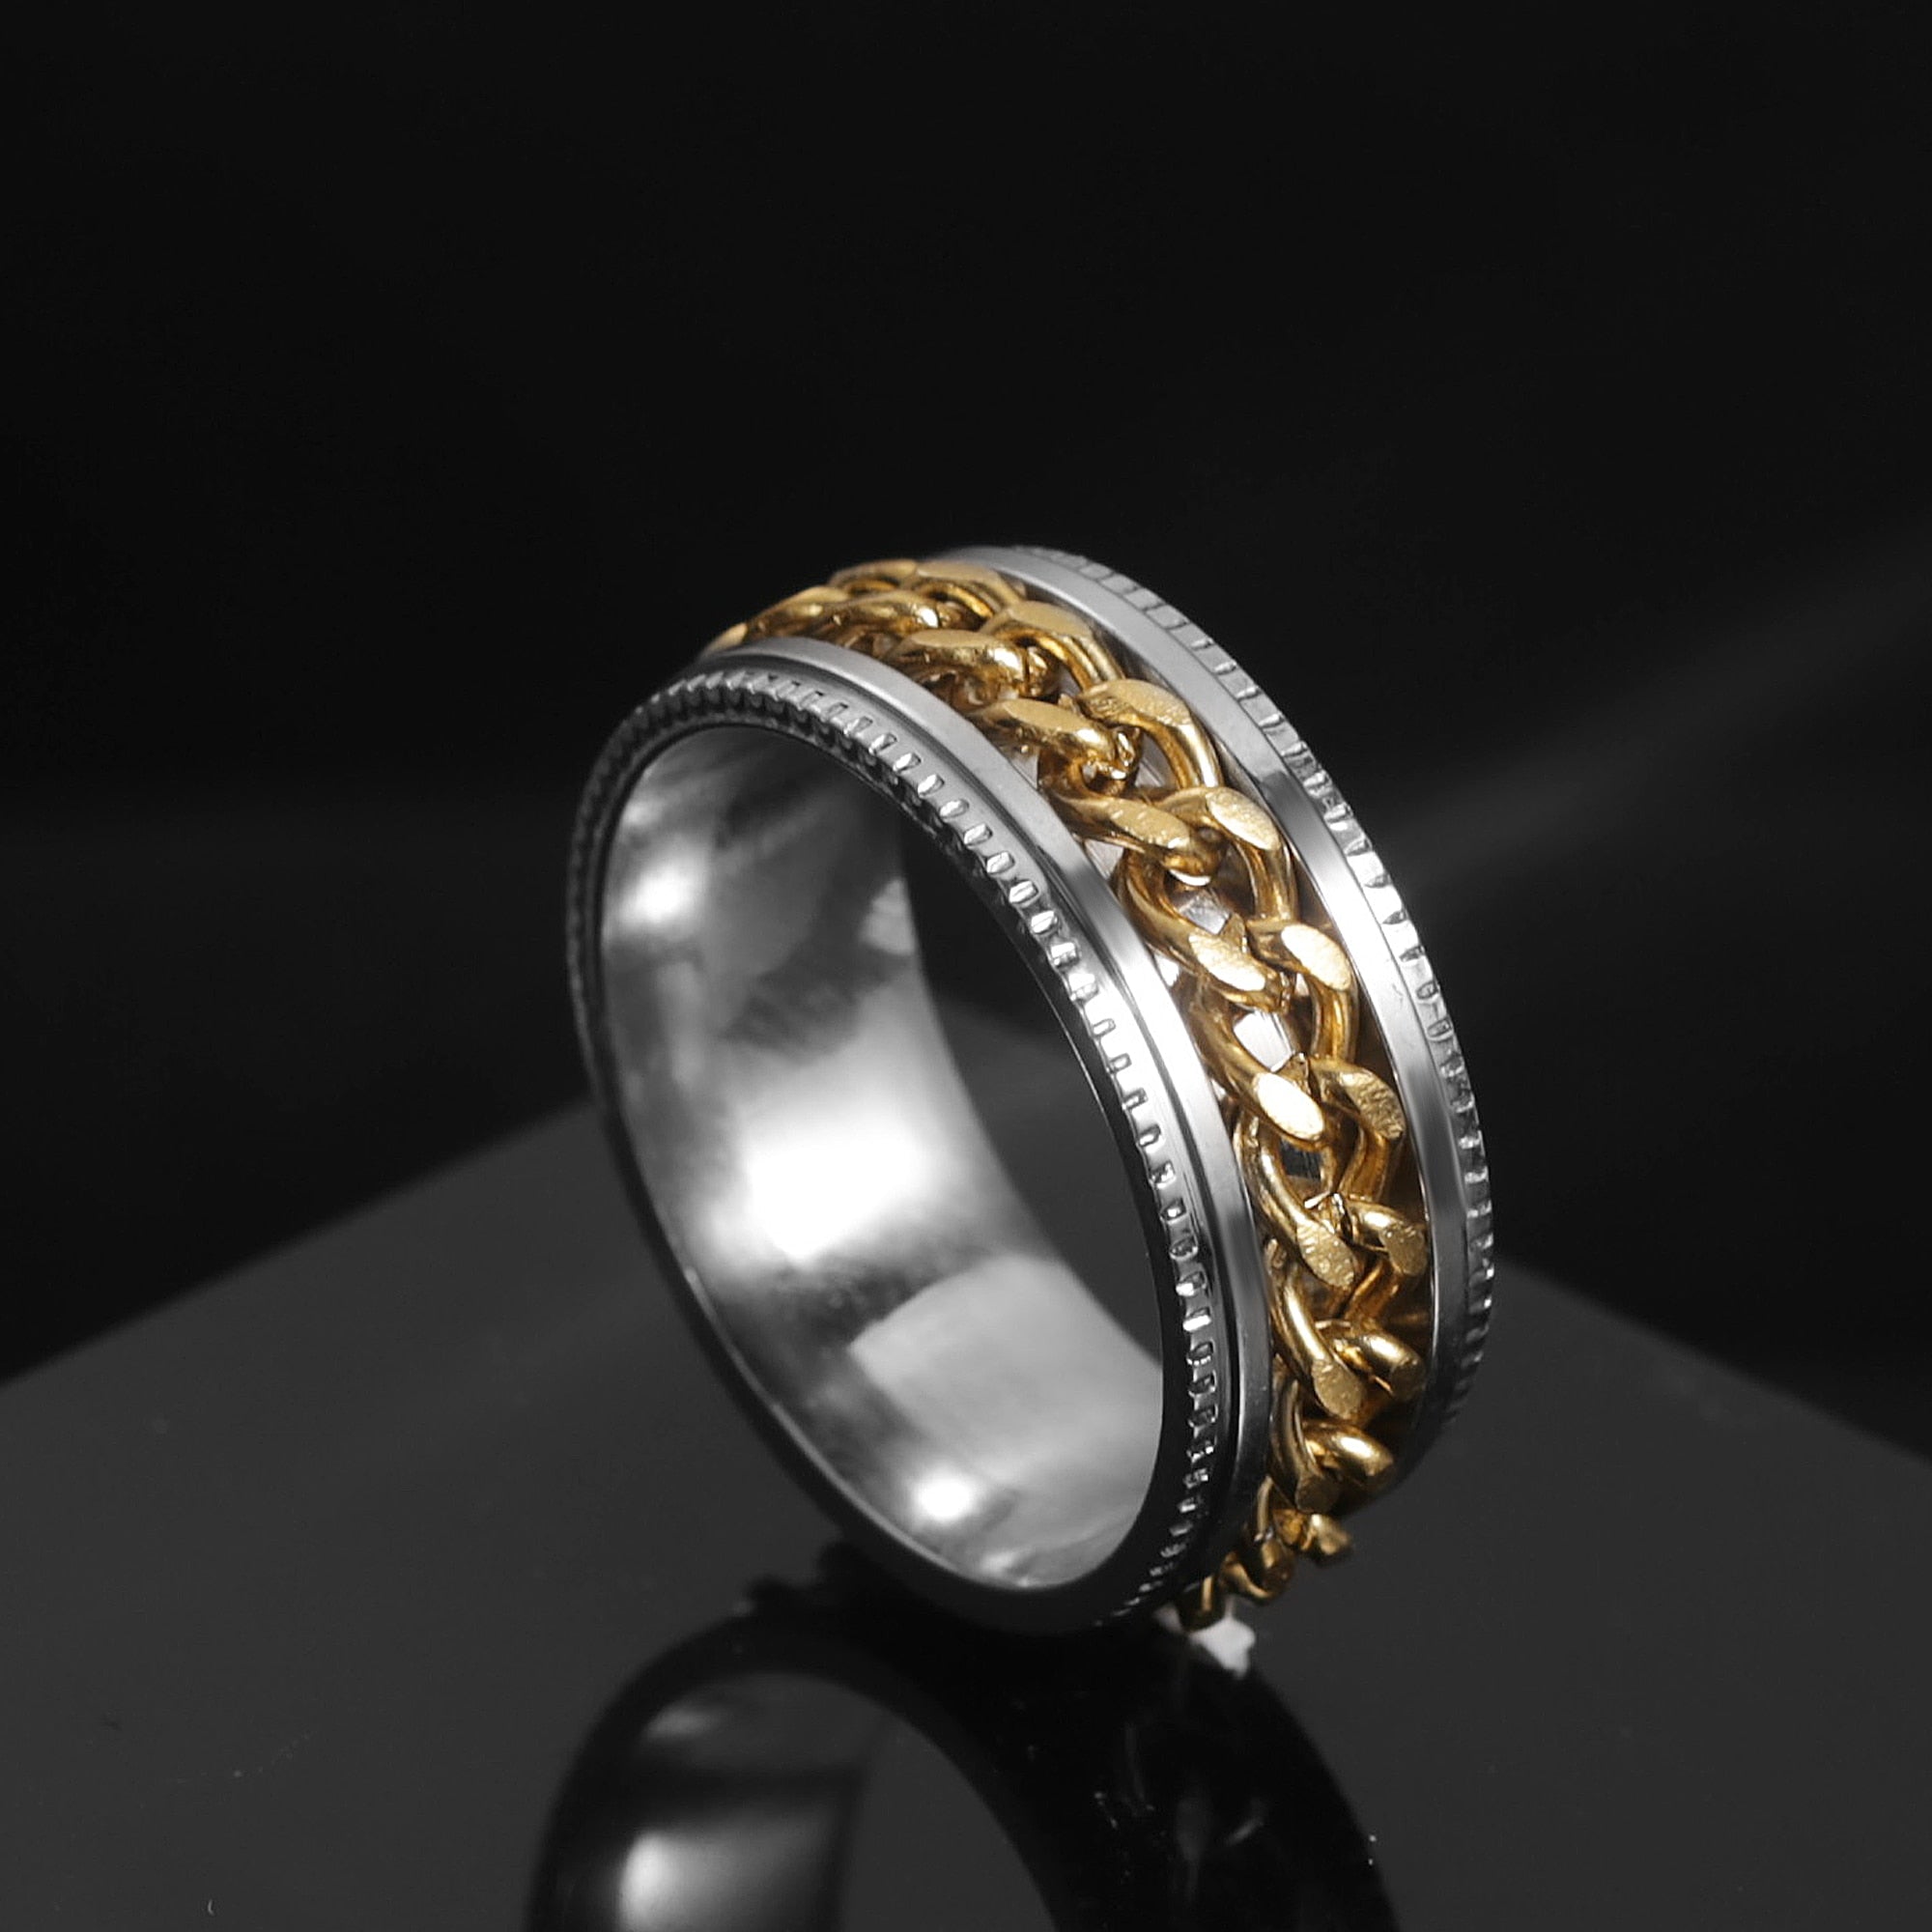 Stainless Steel Rotatable Couple Ring